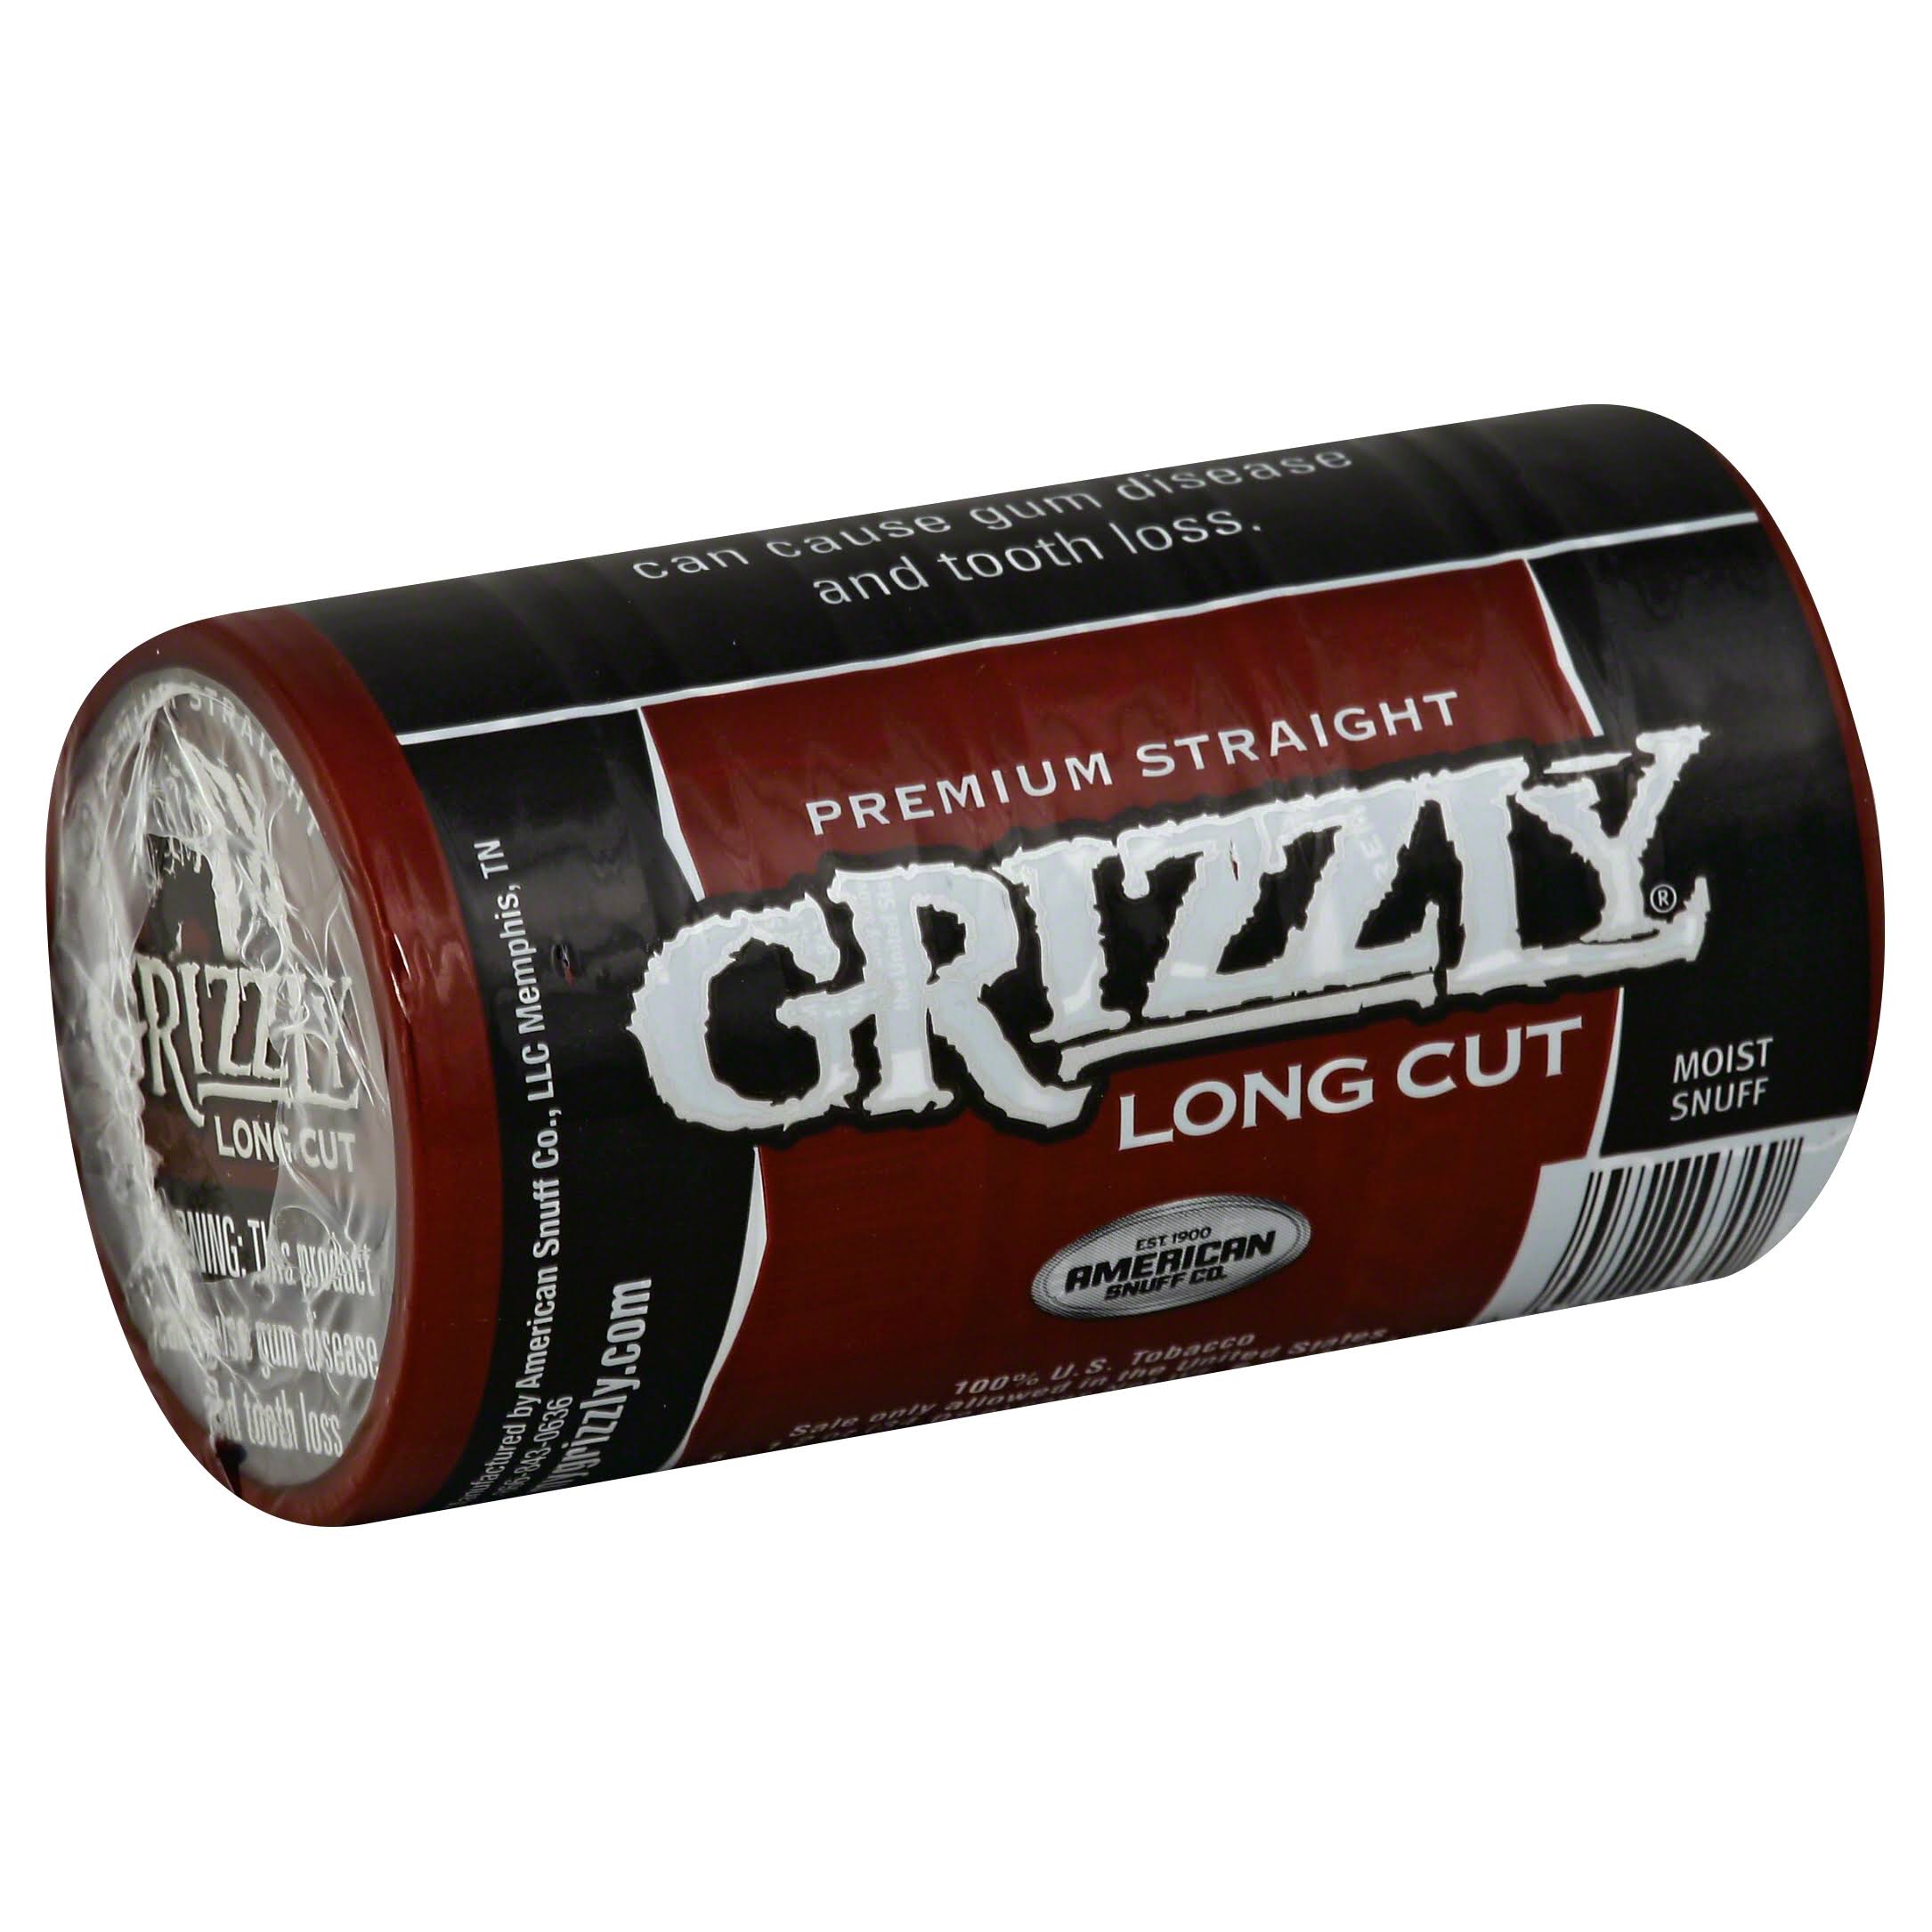 Grizzly Snuff, Moist, Premium Straight, Long Cut - 5 pack, 1.2 oz cans